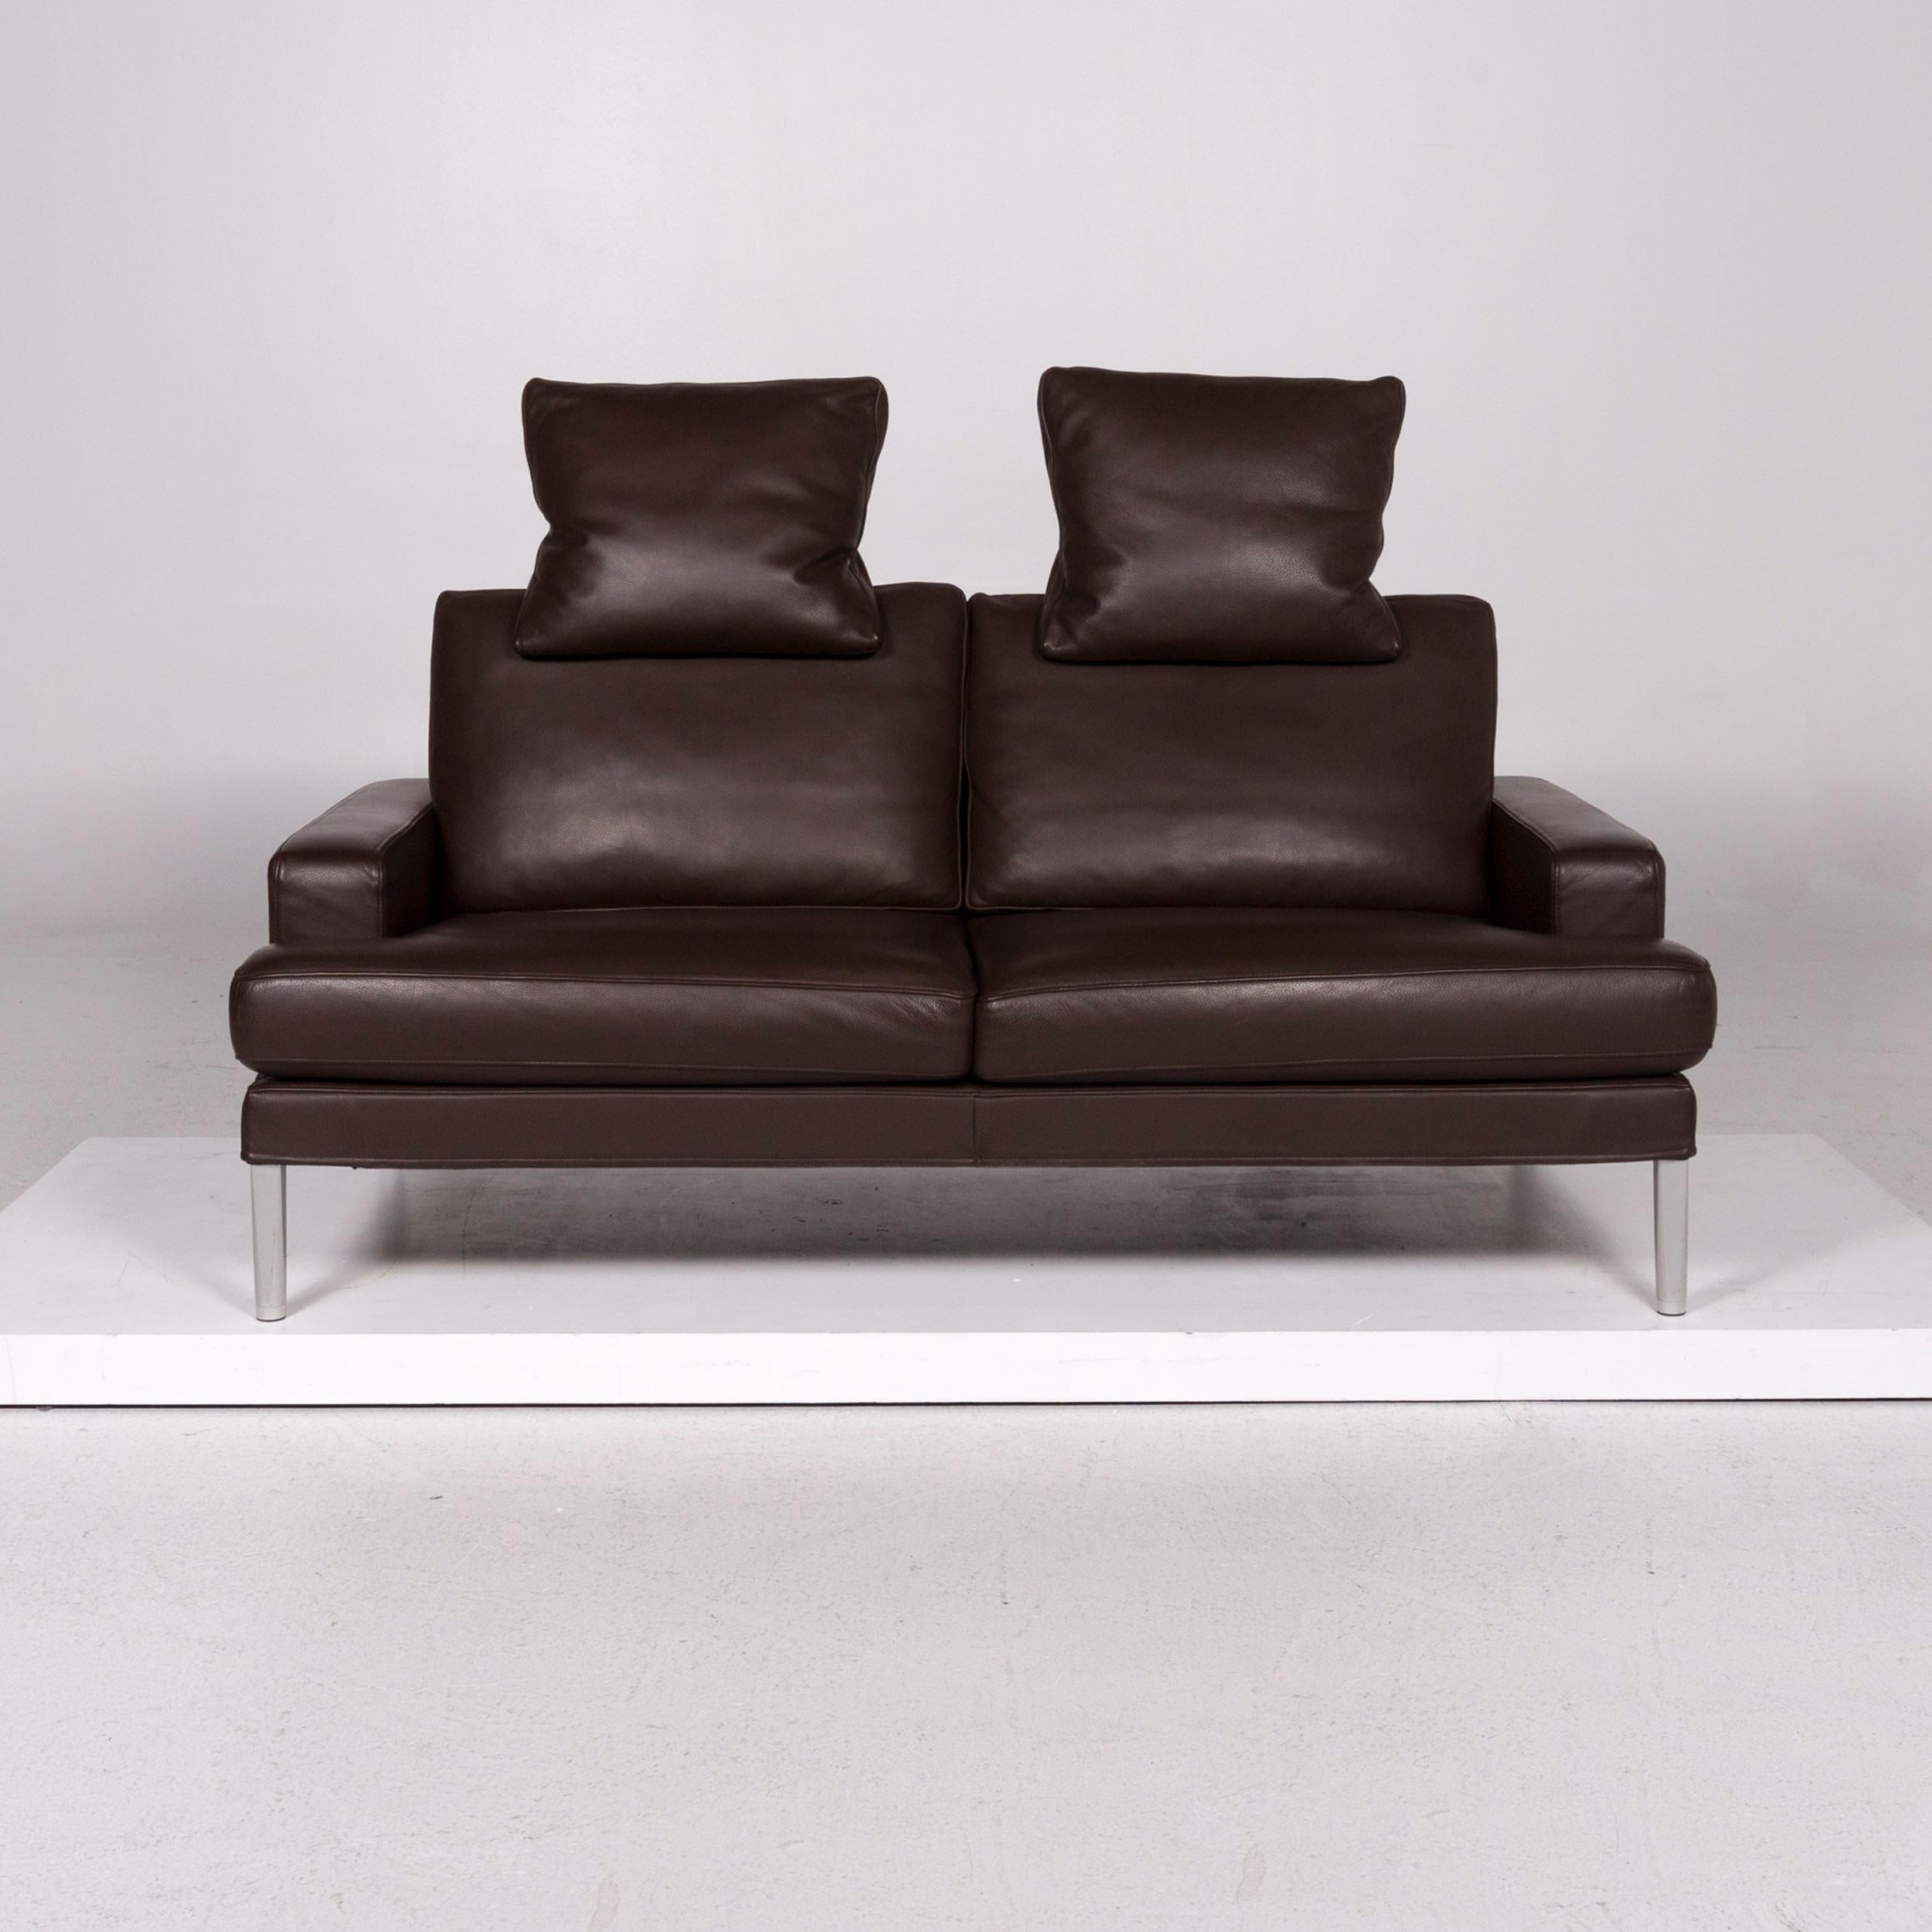 We bring to you a FSM Clarus leather sofa brown dark brown two-seat function couch.

 

 Product measurements in centimeters:
 

Depth 86
Width 170
Height 81
Seat-height 44
Rest-height 54
Seat-depth 51
Seat-width 96
Back-height 38.